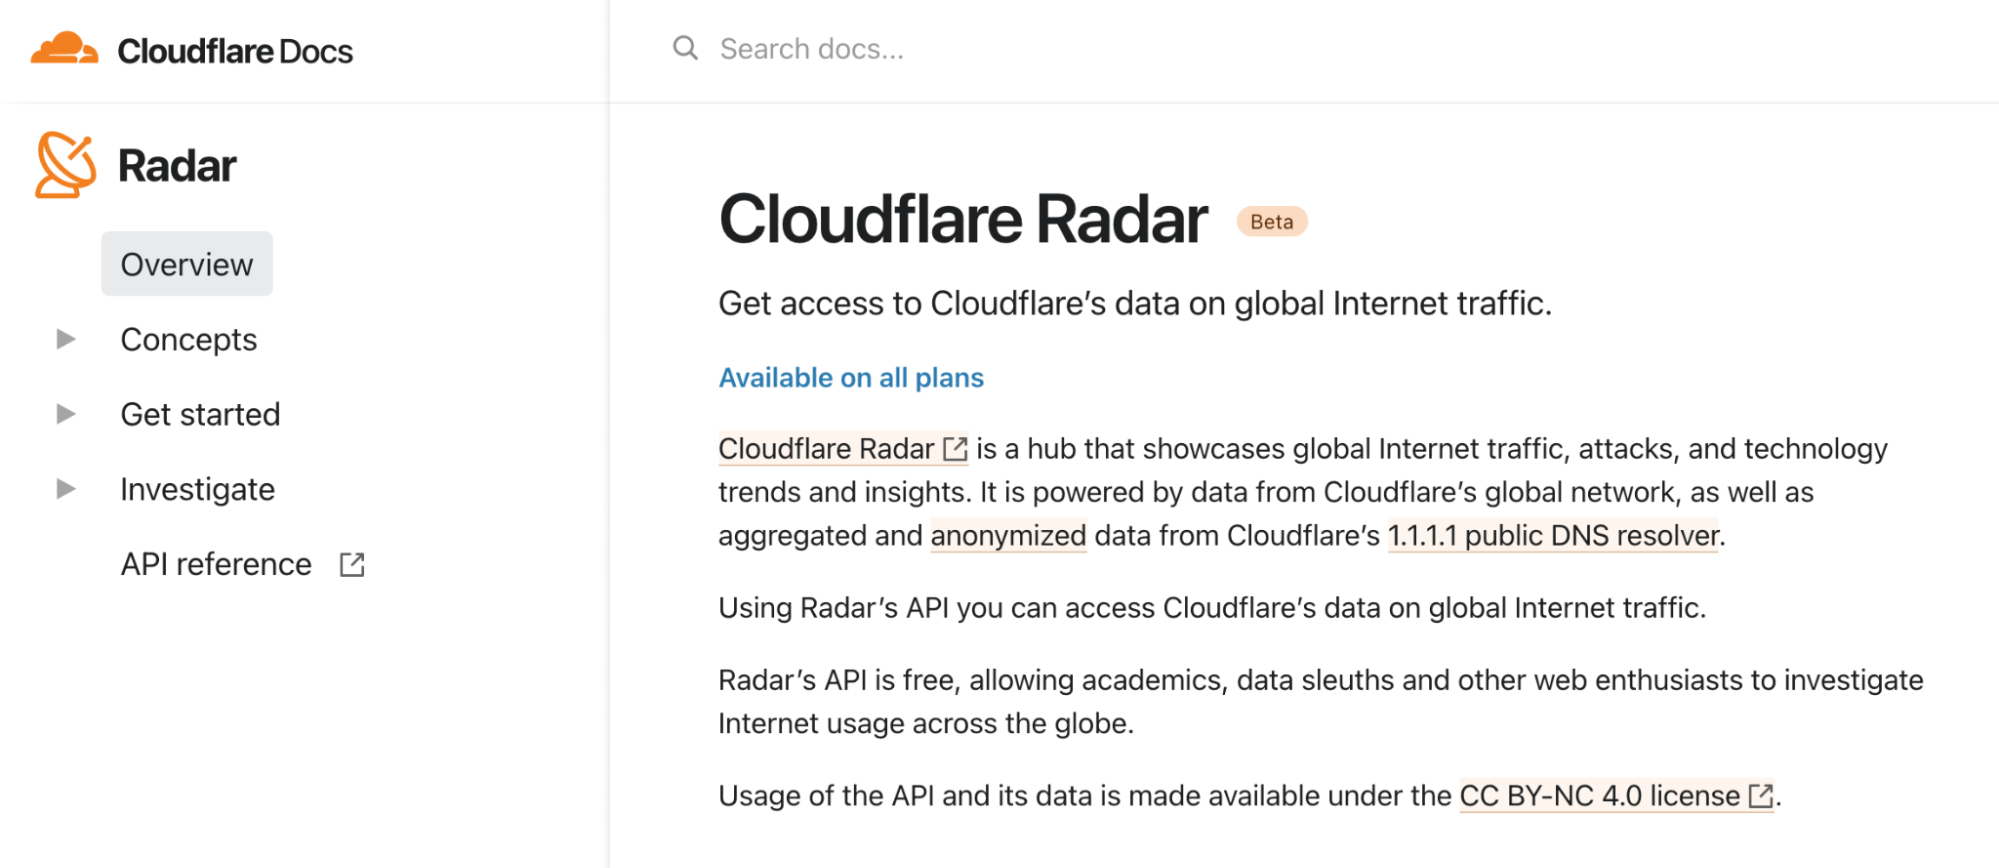 How we built it: the technology behind Cloudflare Radar 2.0